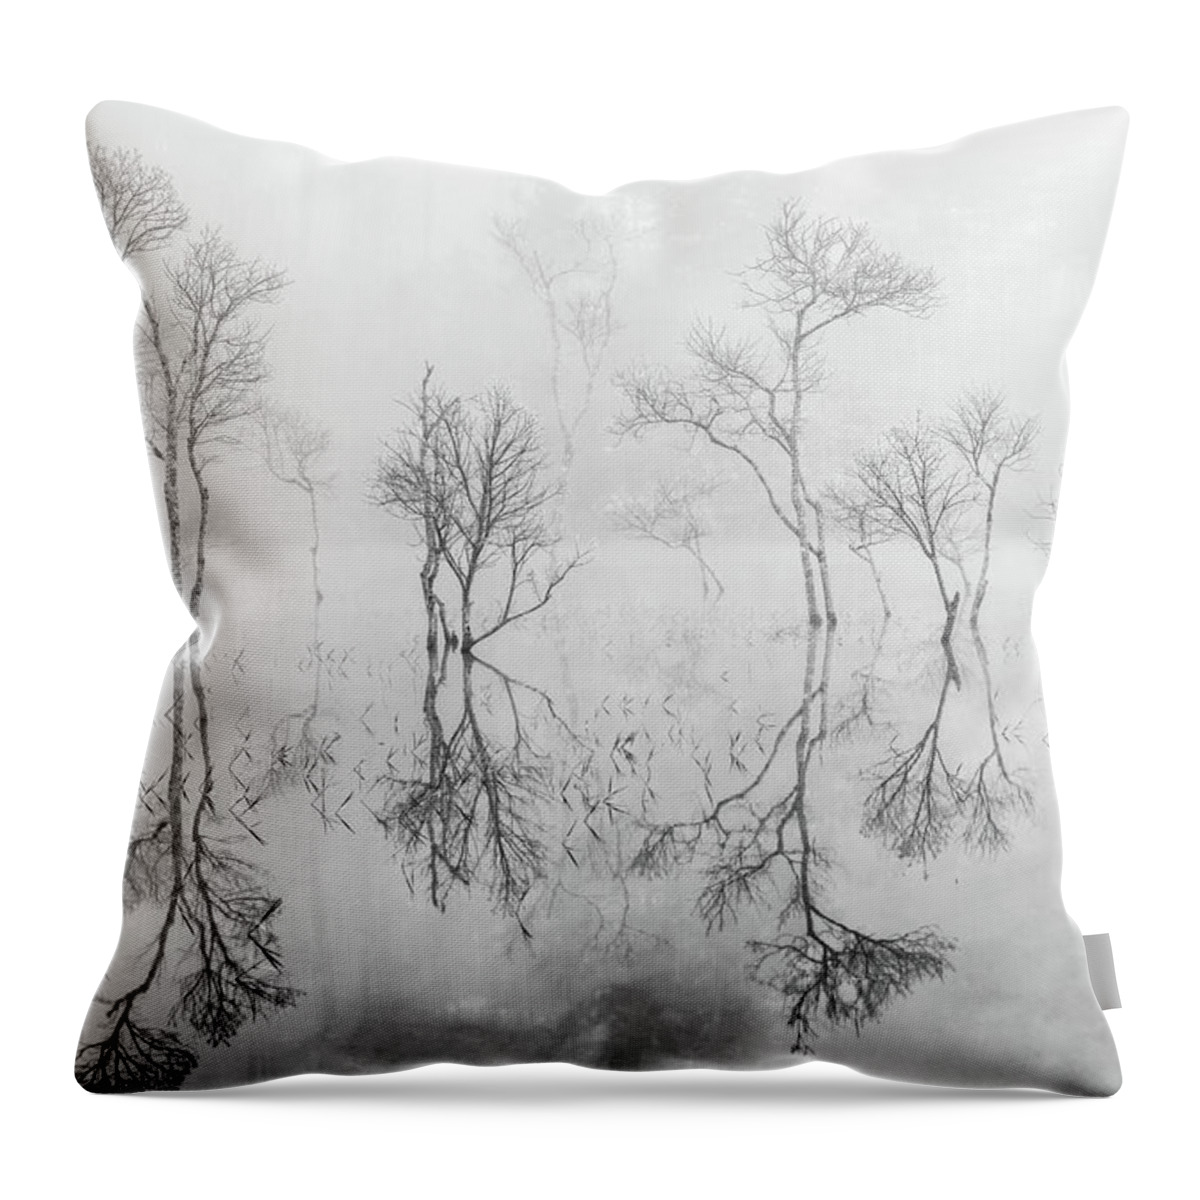 Awesome Throw Pillow featuring the photograph Beauty Winter by Khanh Bui Phu